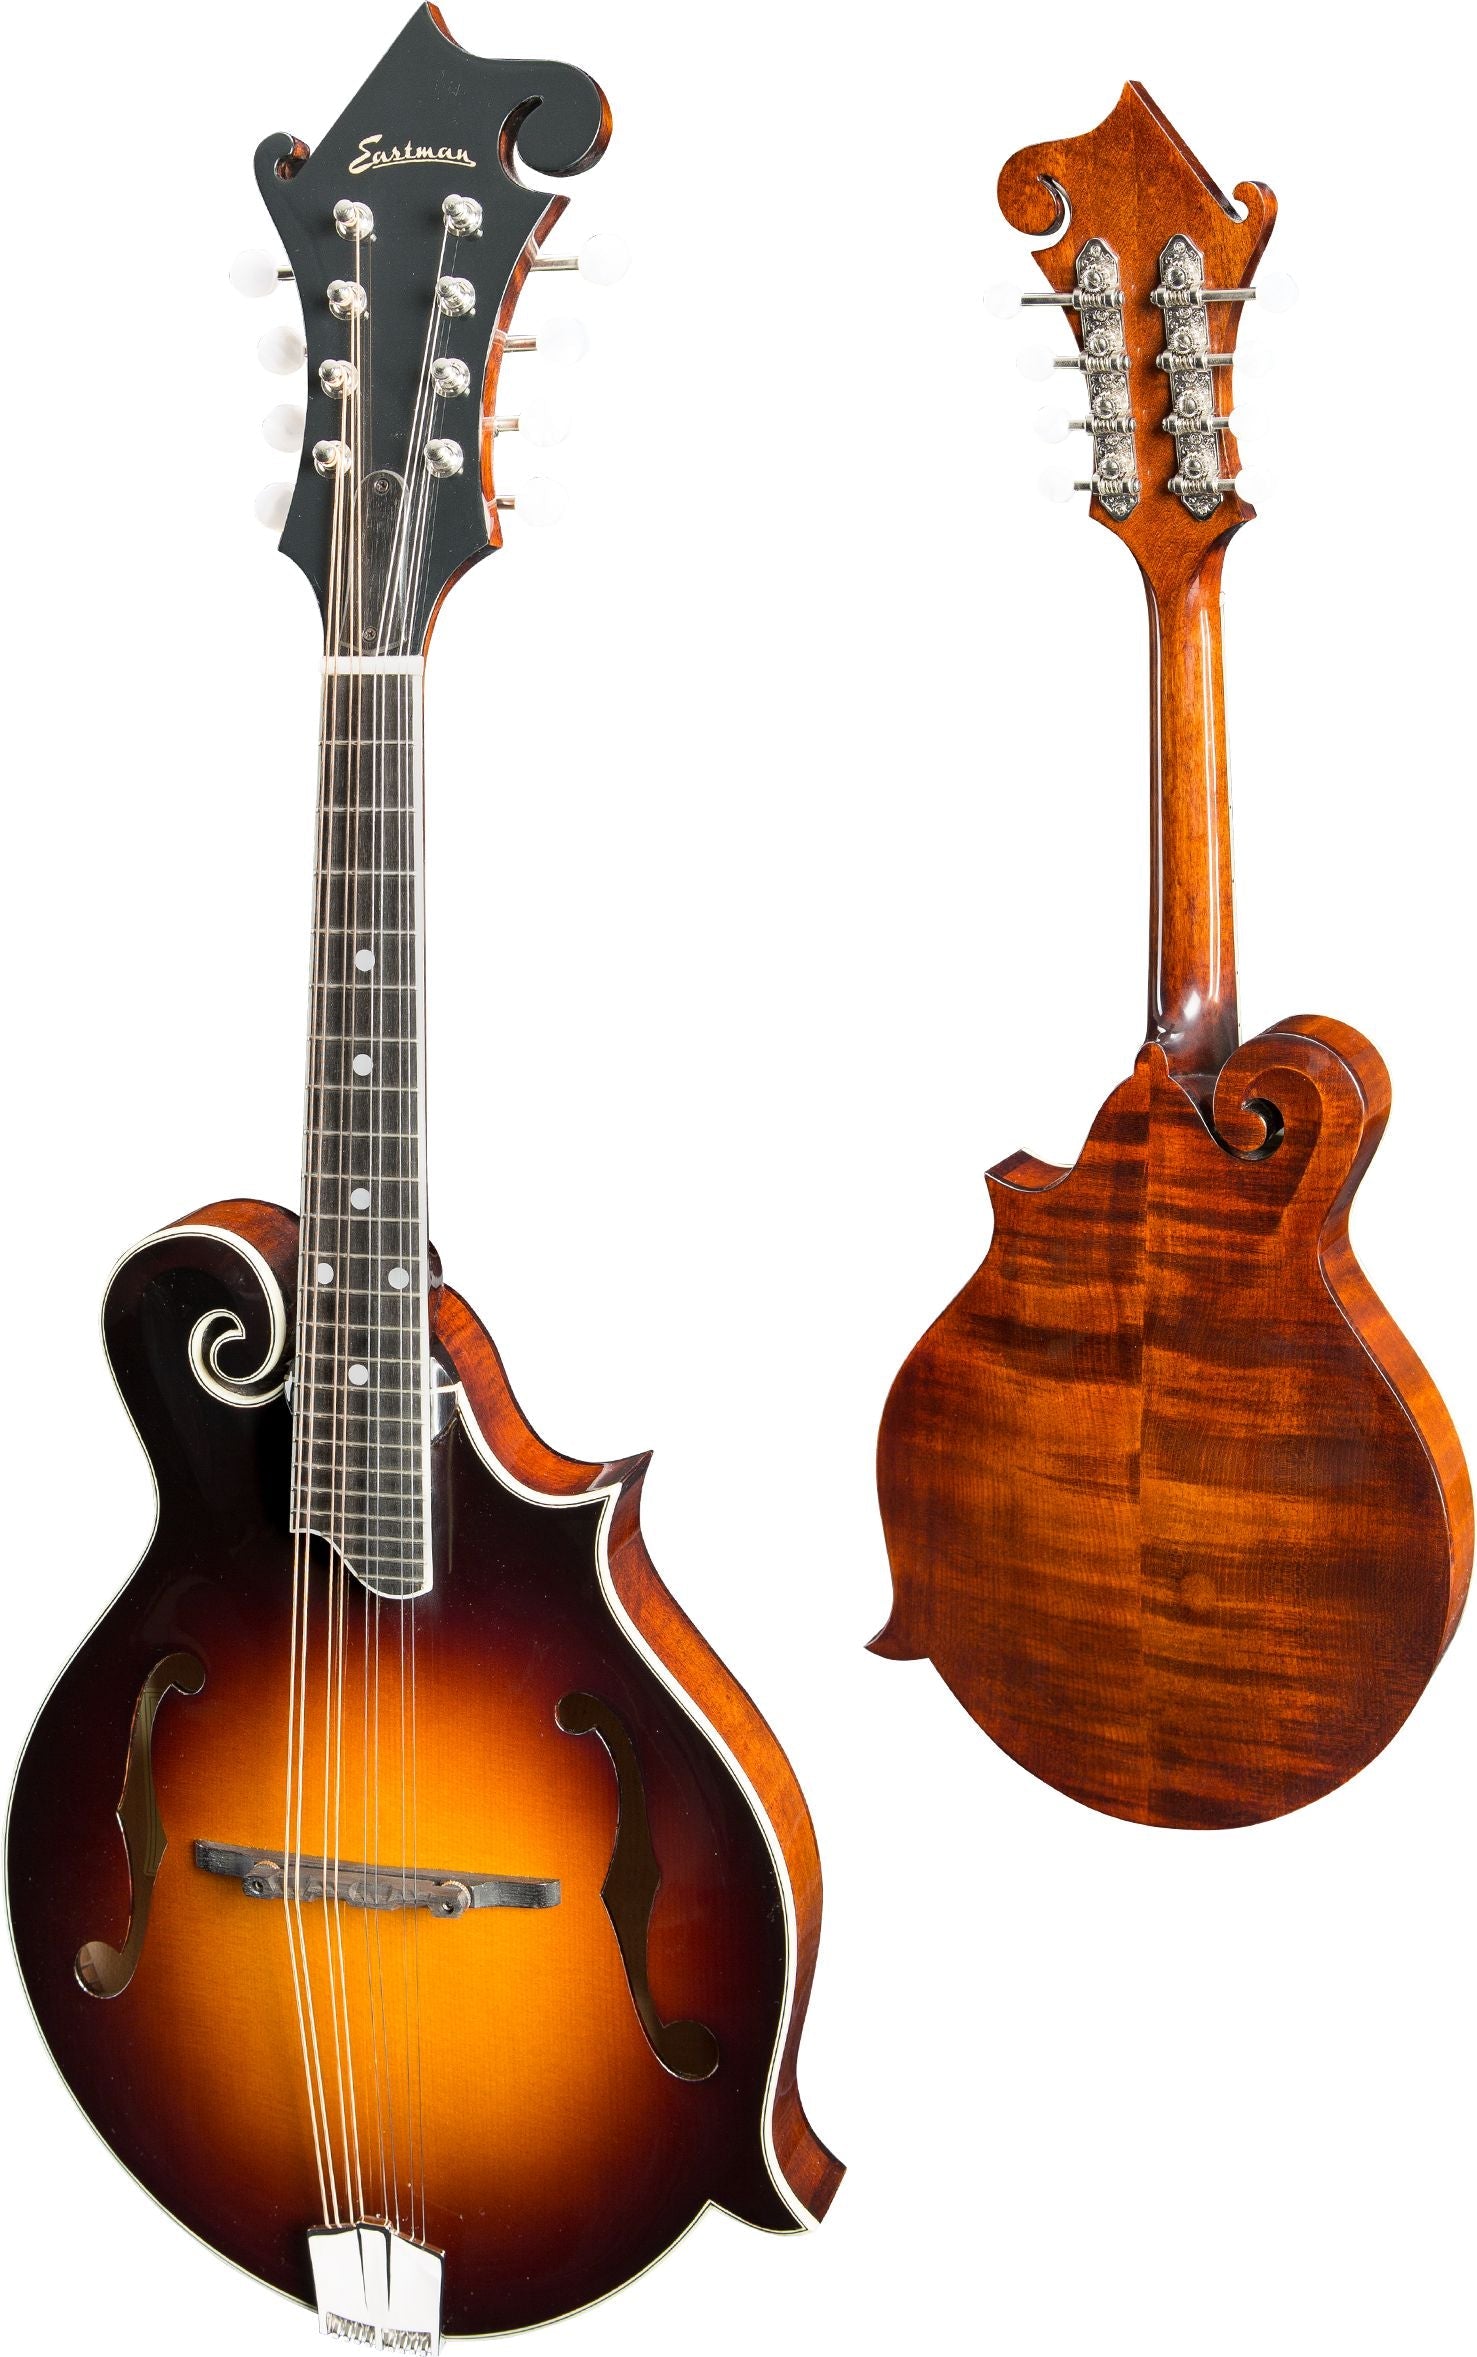 Eastman MD515-CS F-style F-holes Classic Sunburst Mandolin (Solid Spruce top, Solid Maple back and sides, w/Case), Mandolin for sale at Richards Guitars.